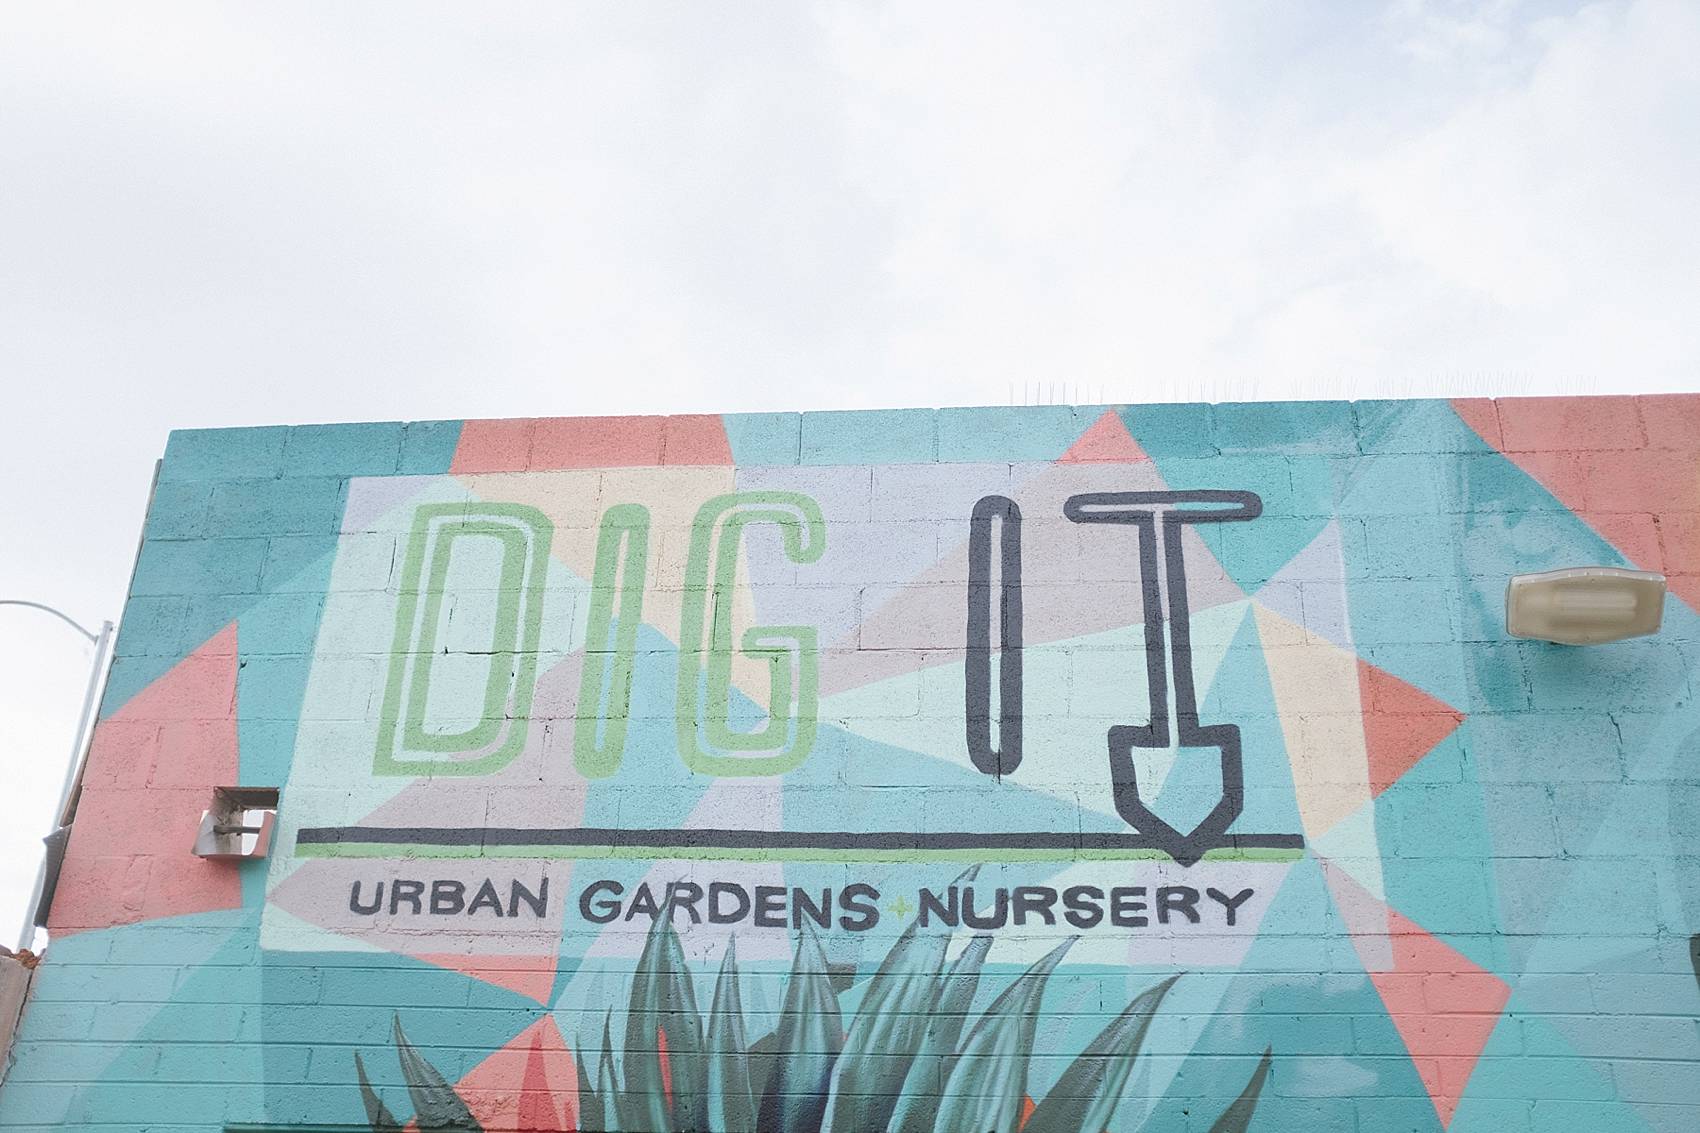 dig it nursery sign side of painted building bright colors and skyline